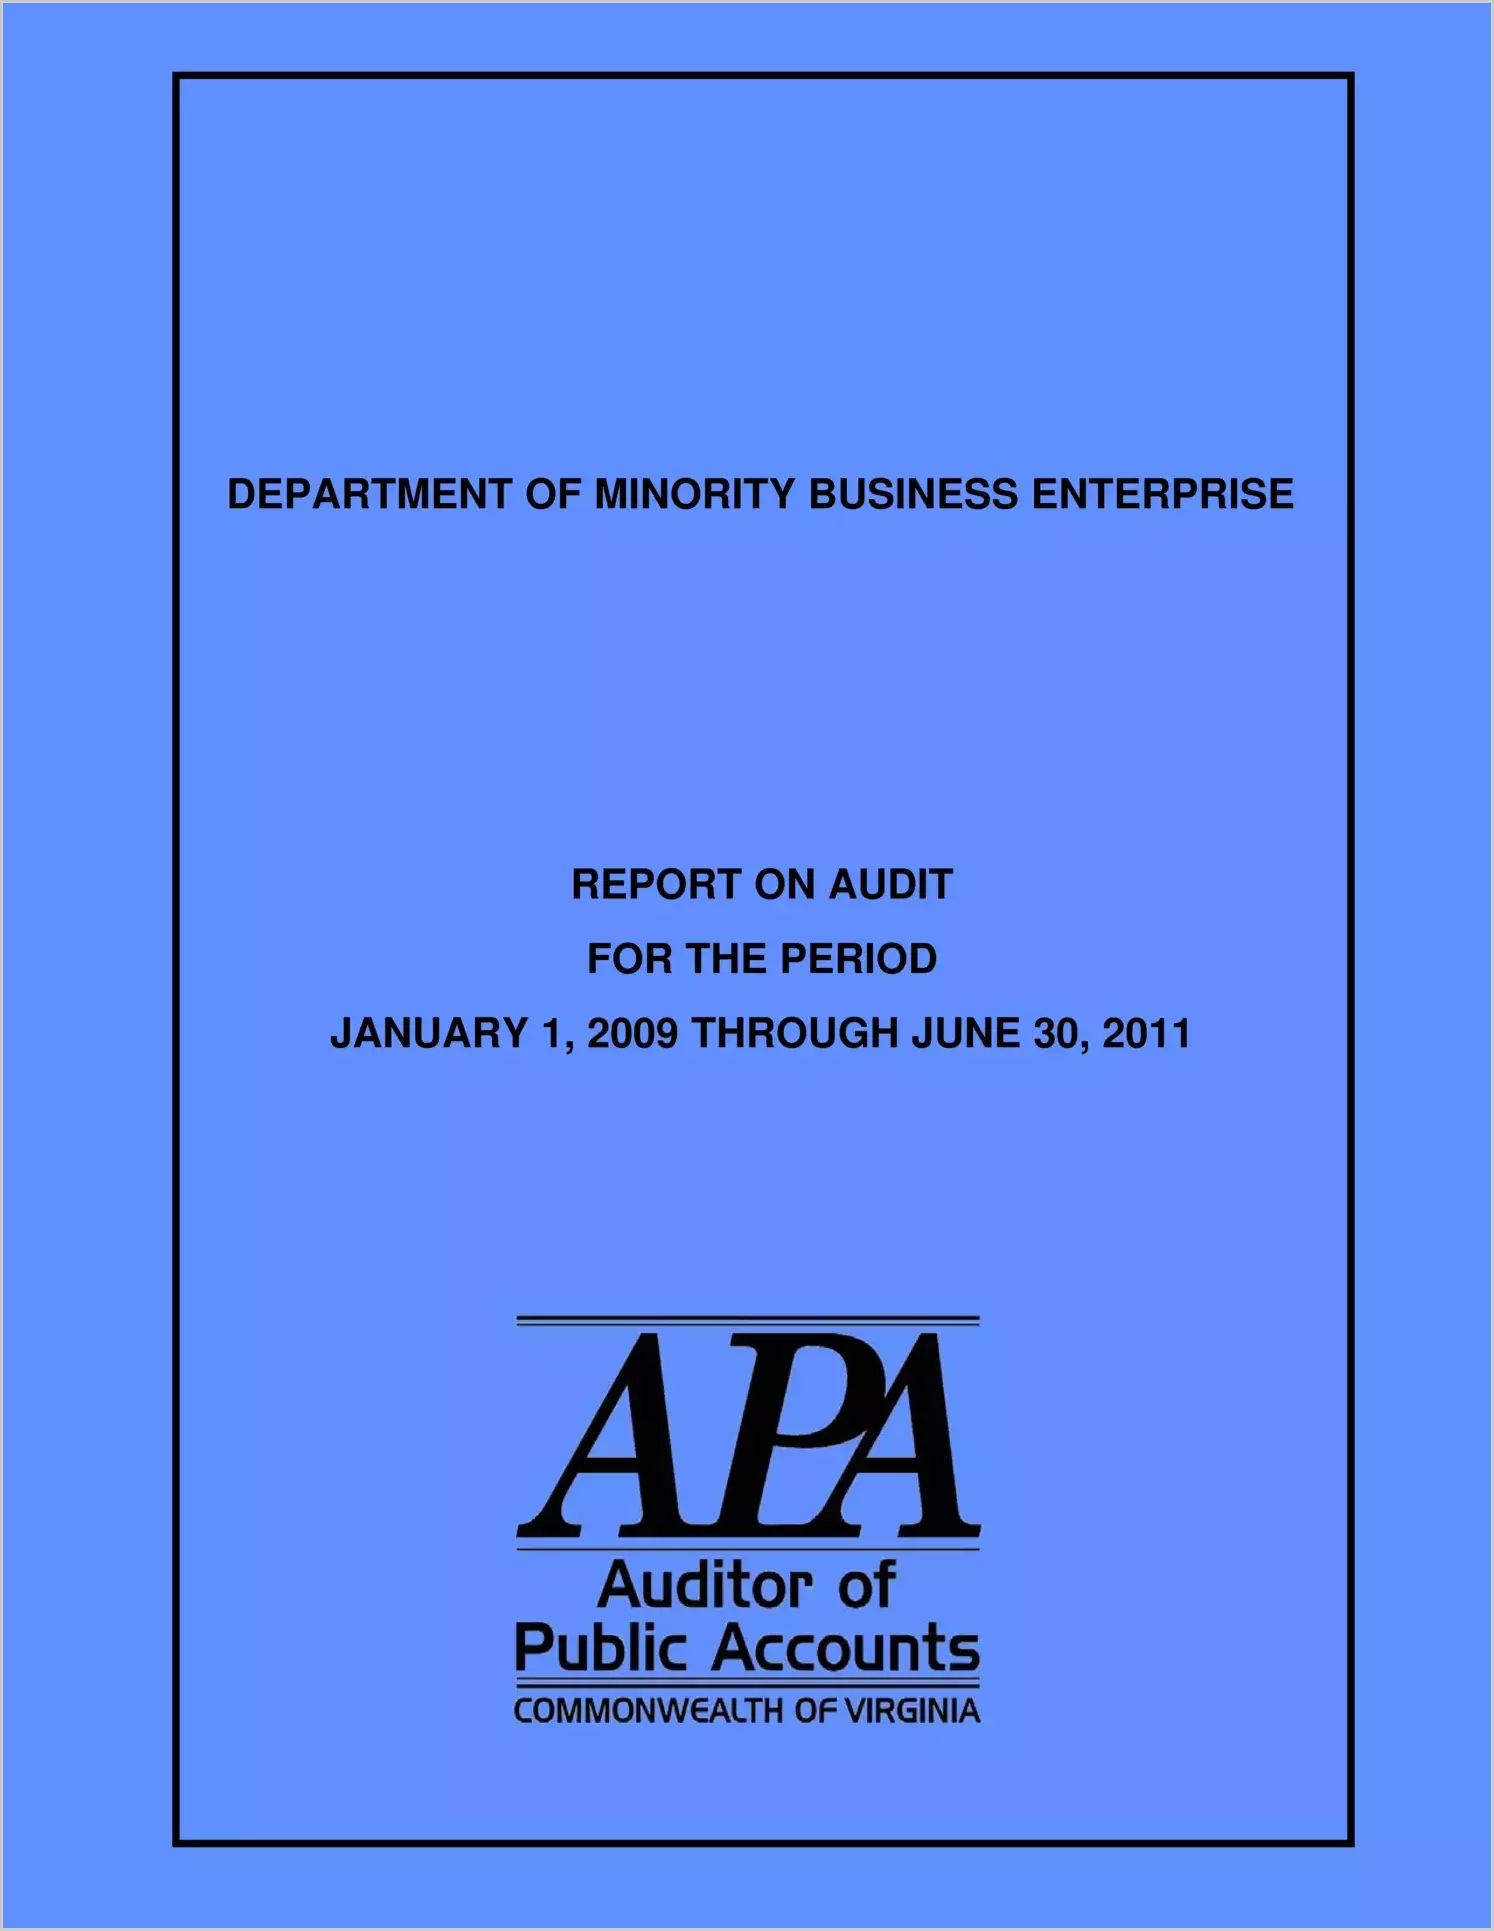 Department of Minority Business Enterprise report on audit for the period January 1, 2009 through June 30, 2011